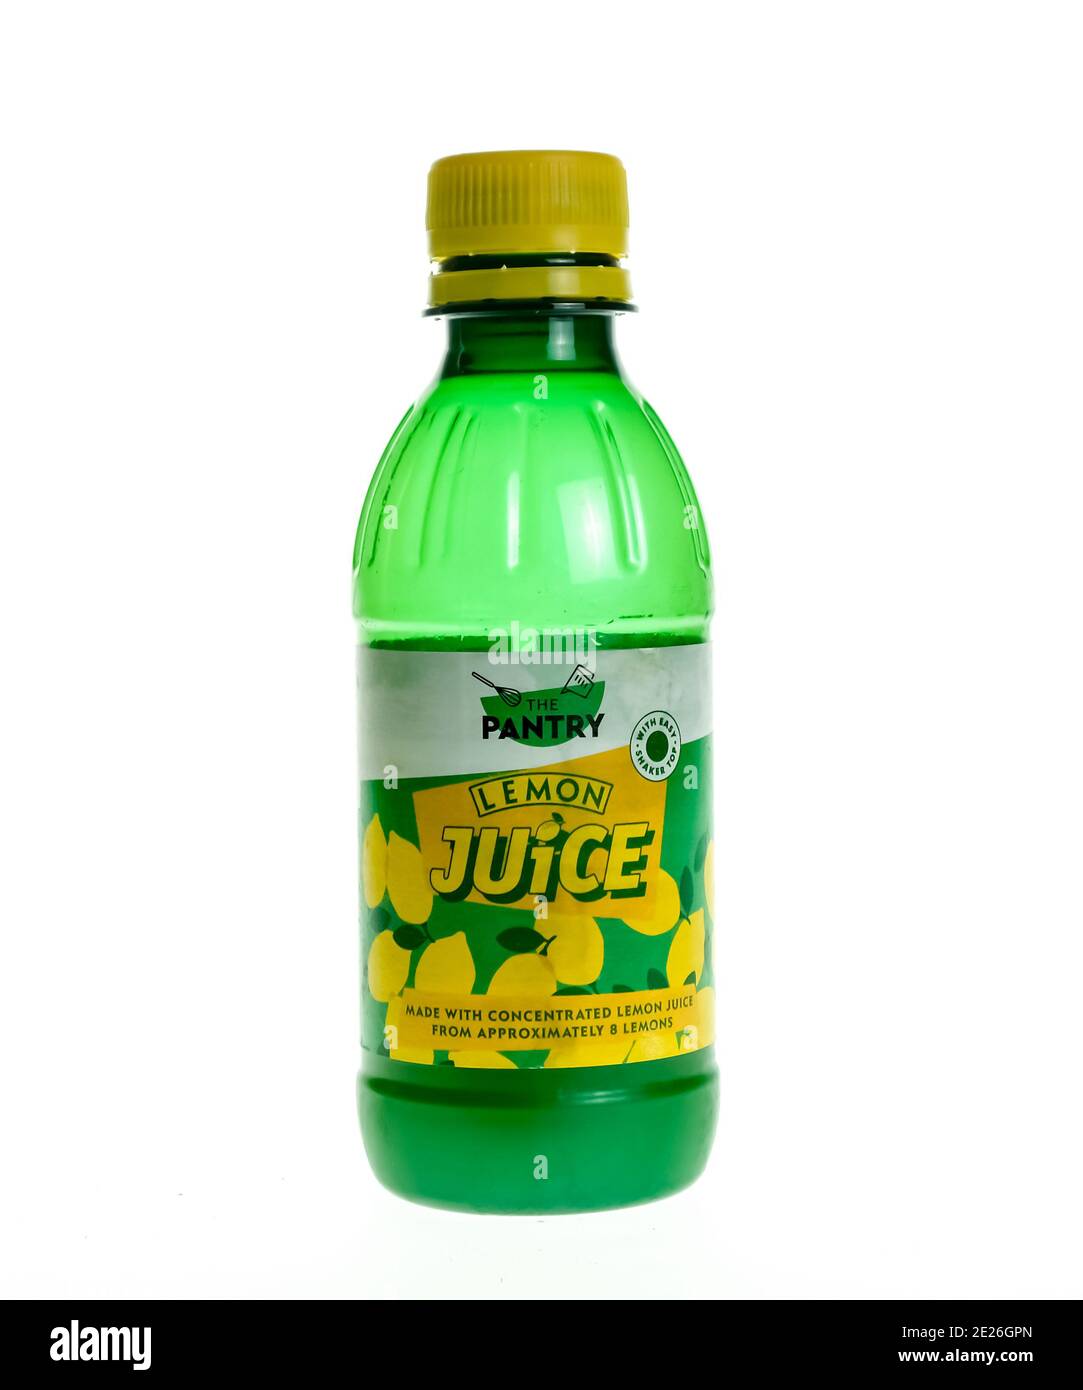 Norwich, Norfolk, UK – December 20 2020. An illustrative photo of a plastic bottle of The Pantry branded lemon juice used for cooking and meal recipes Stock Photo